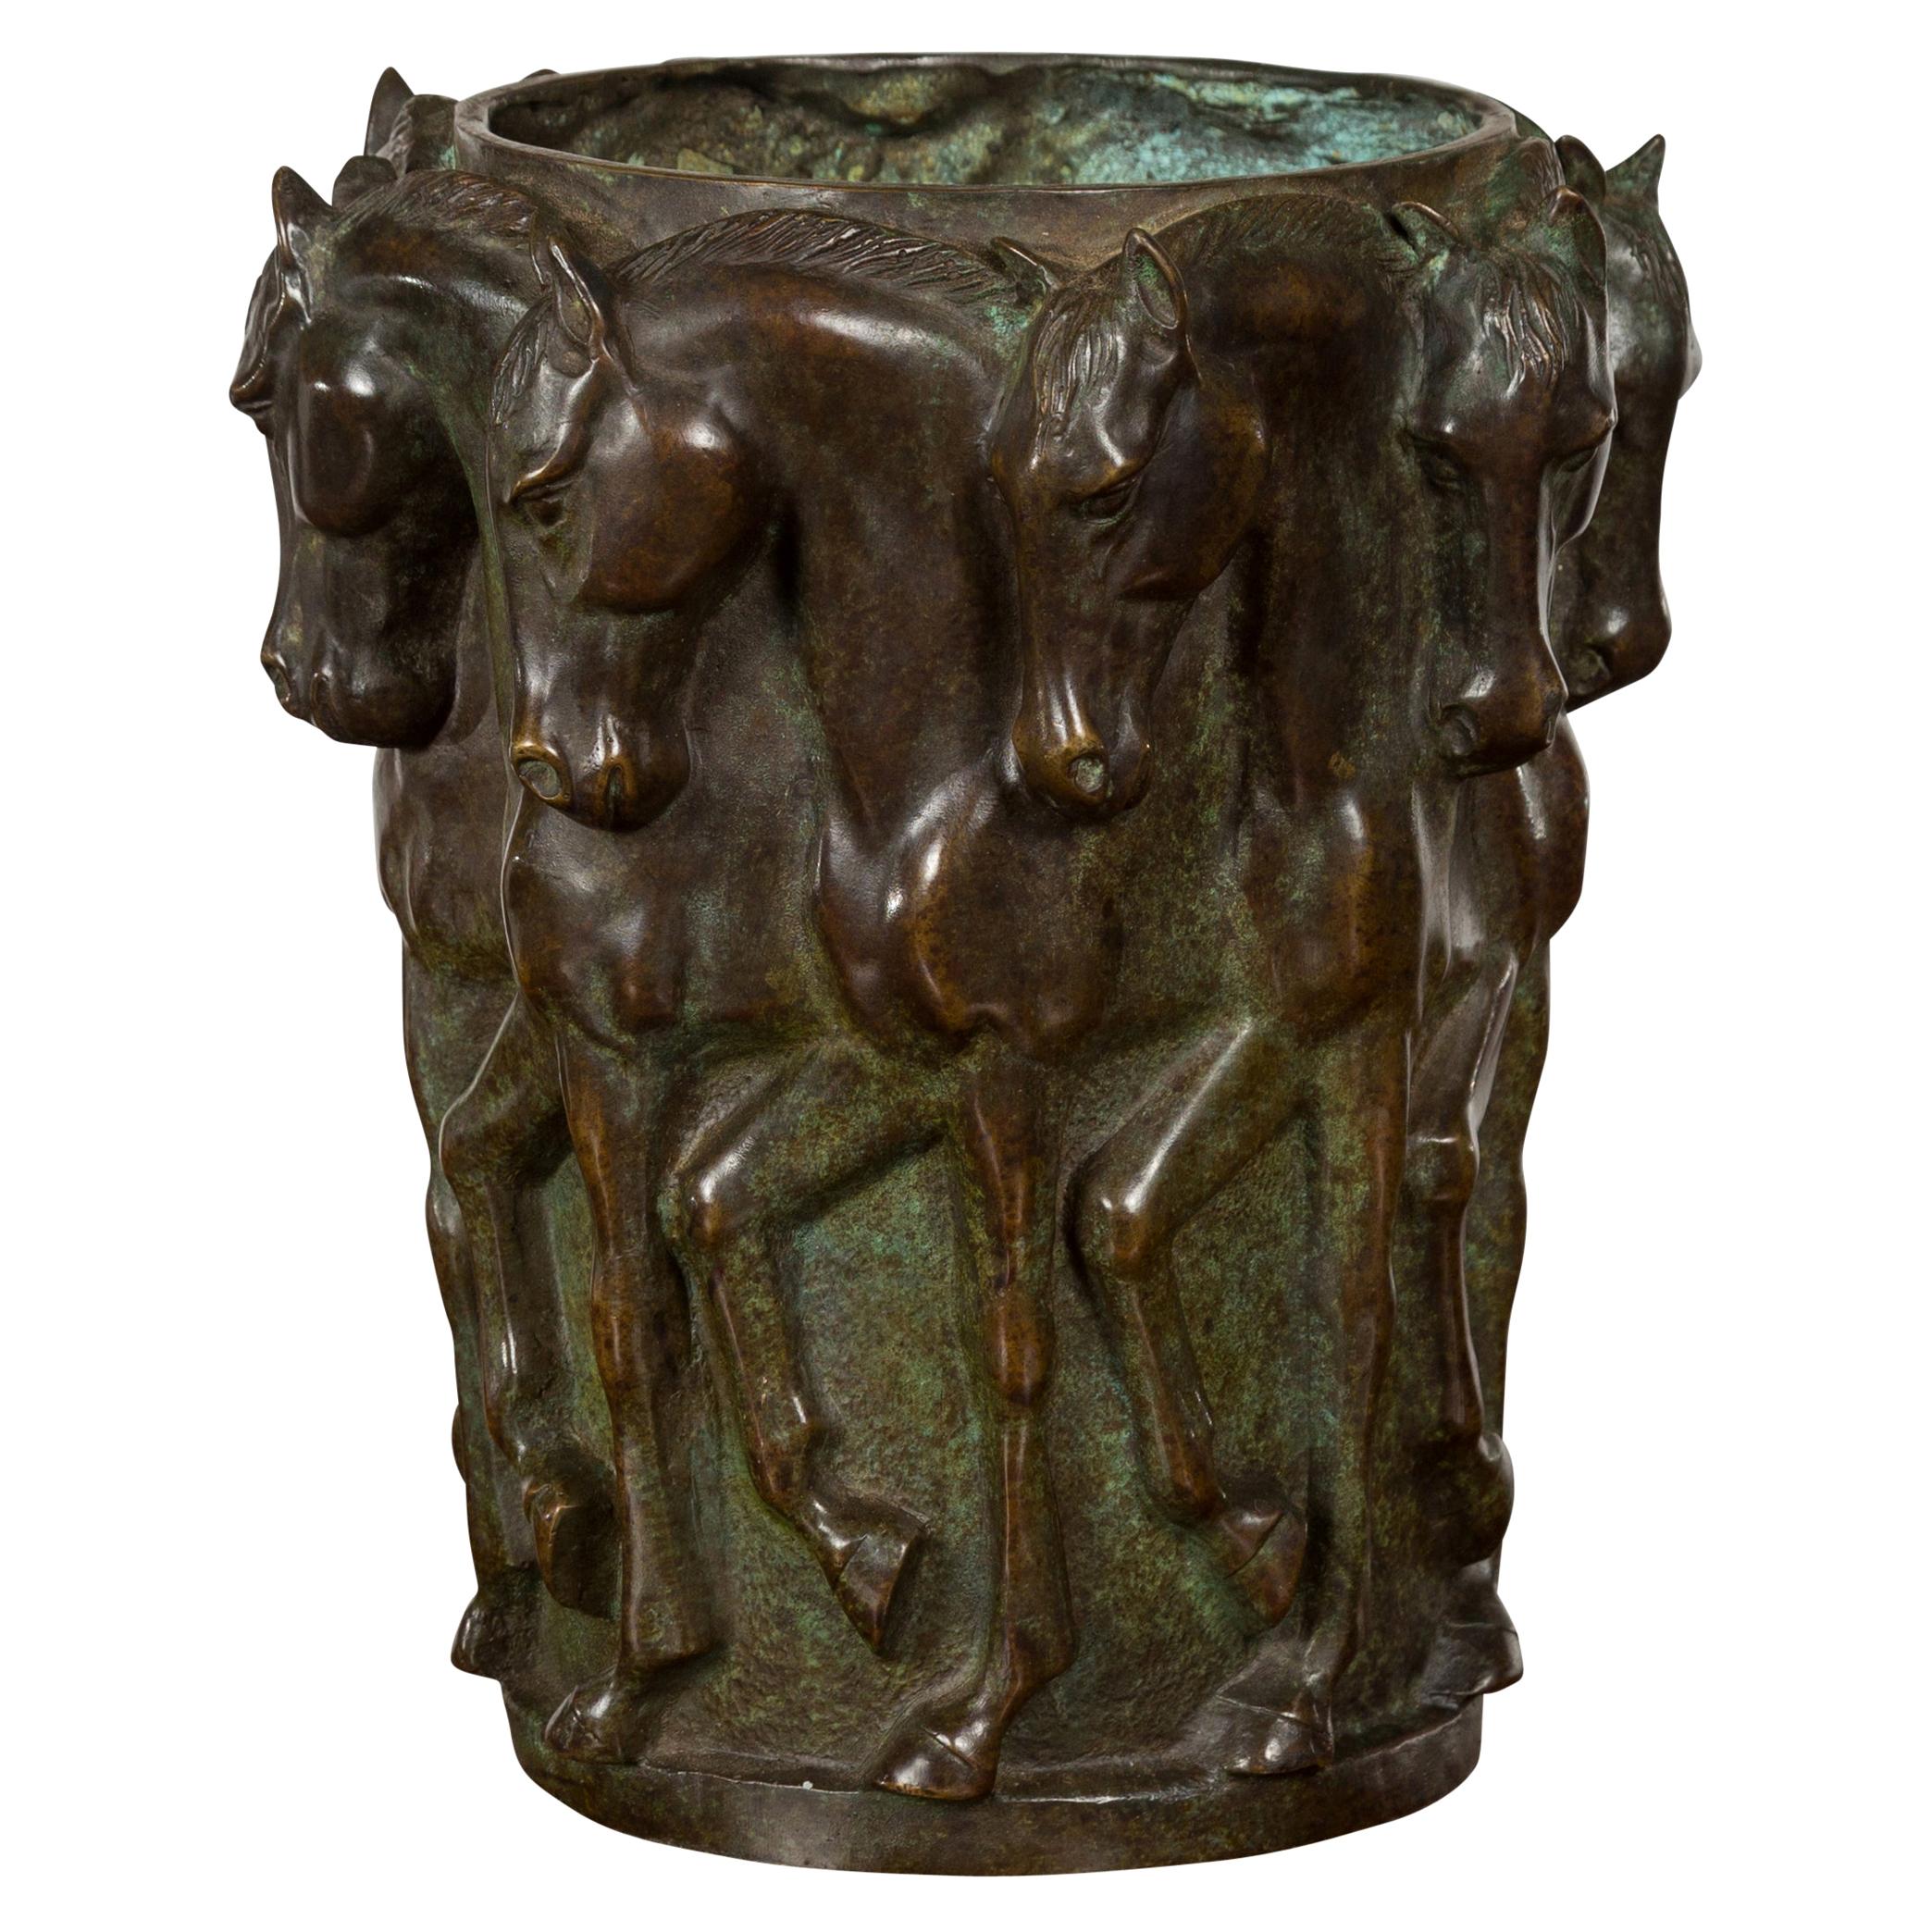 1920s Patinated Bronze Vase with Frieze of Passing Horses Cast in High Relief